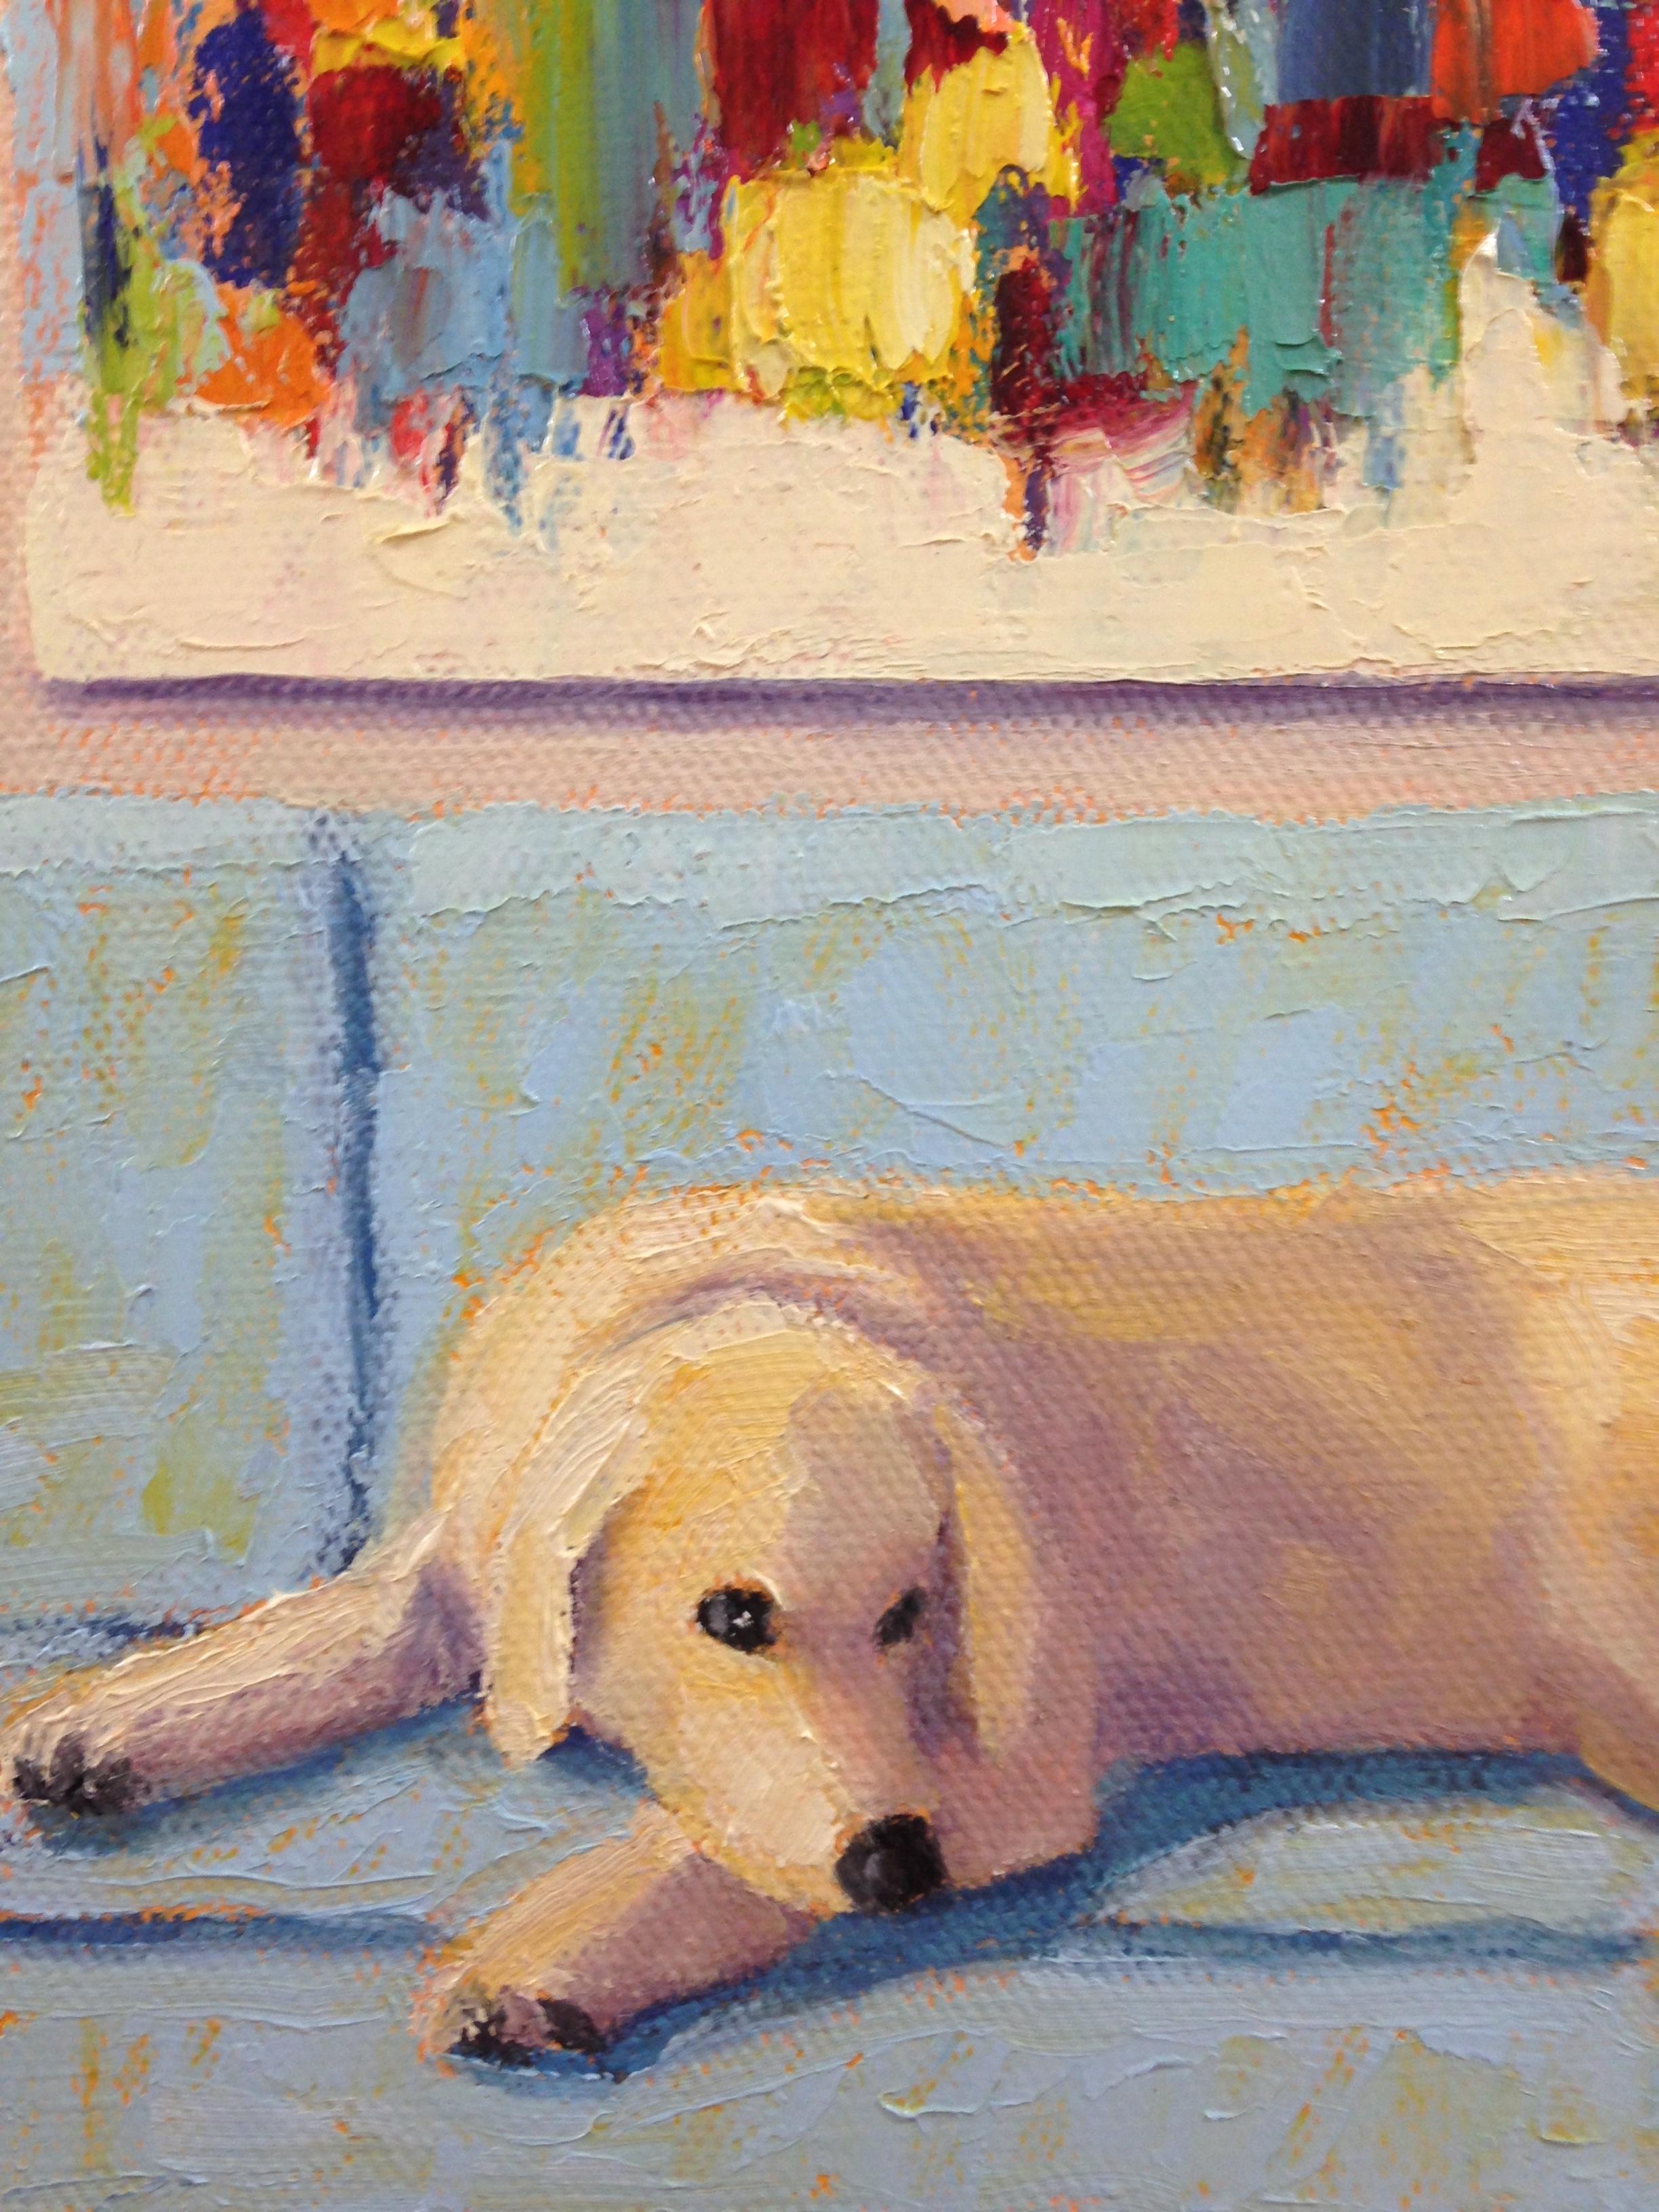 <p>Artist Comments<br>Part of artist Pat Doherty's series of living room scenes with a dog lying on the couch. In her work, she focuses on building dynamic compositions that center around her subject. In this painting, a yellow lab daydreams on a